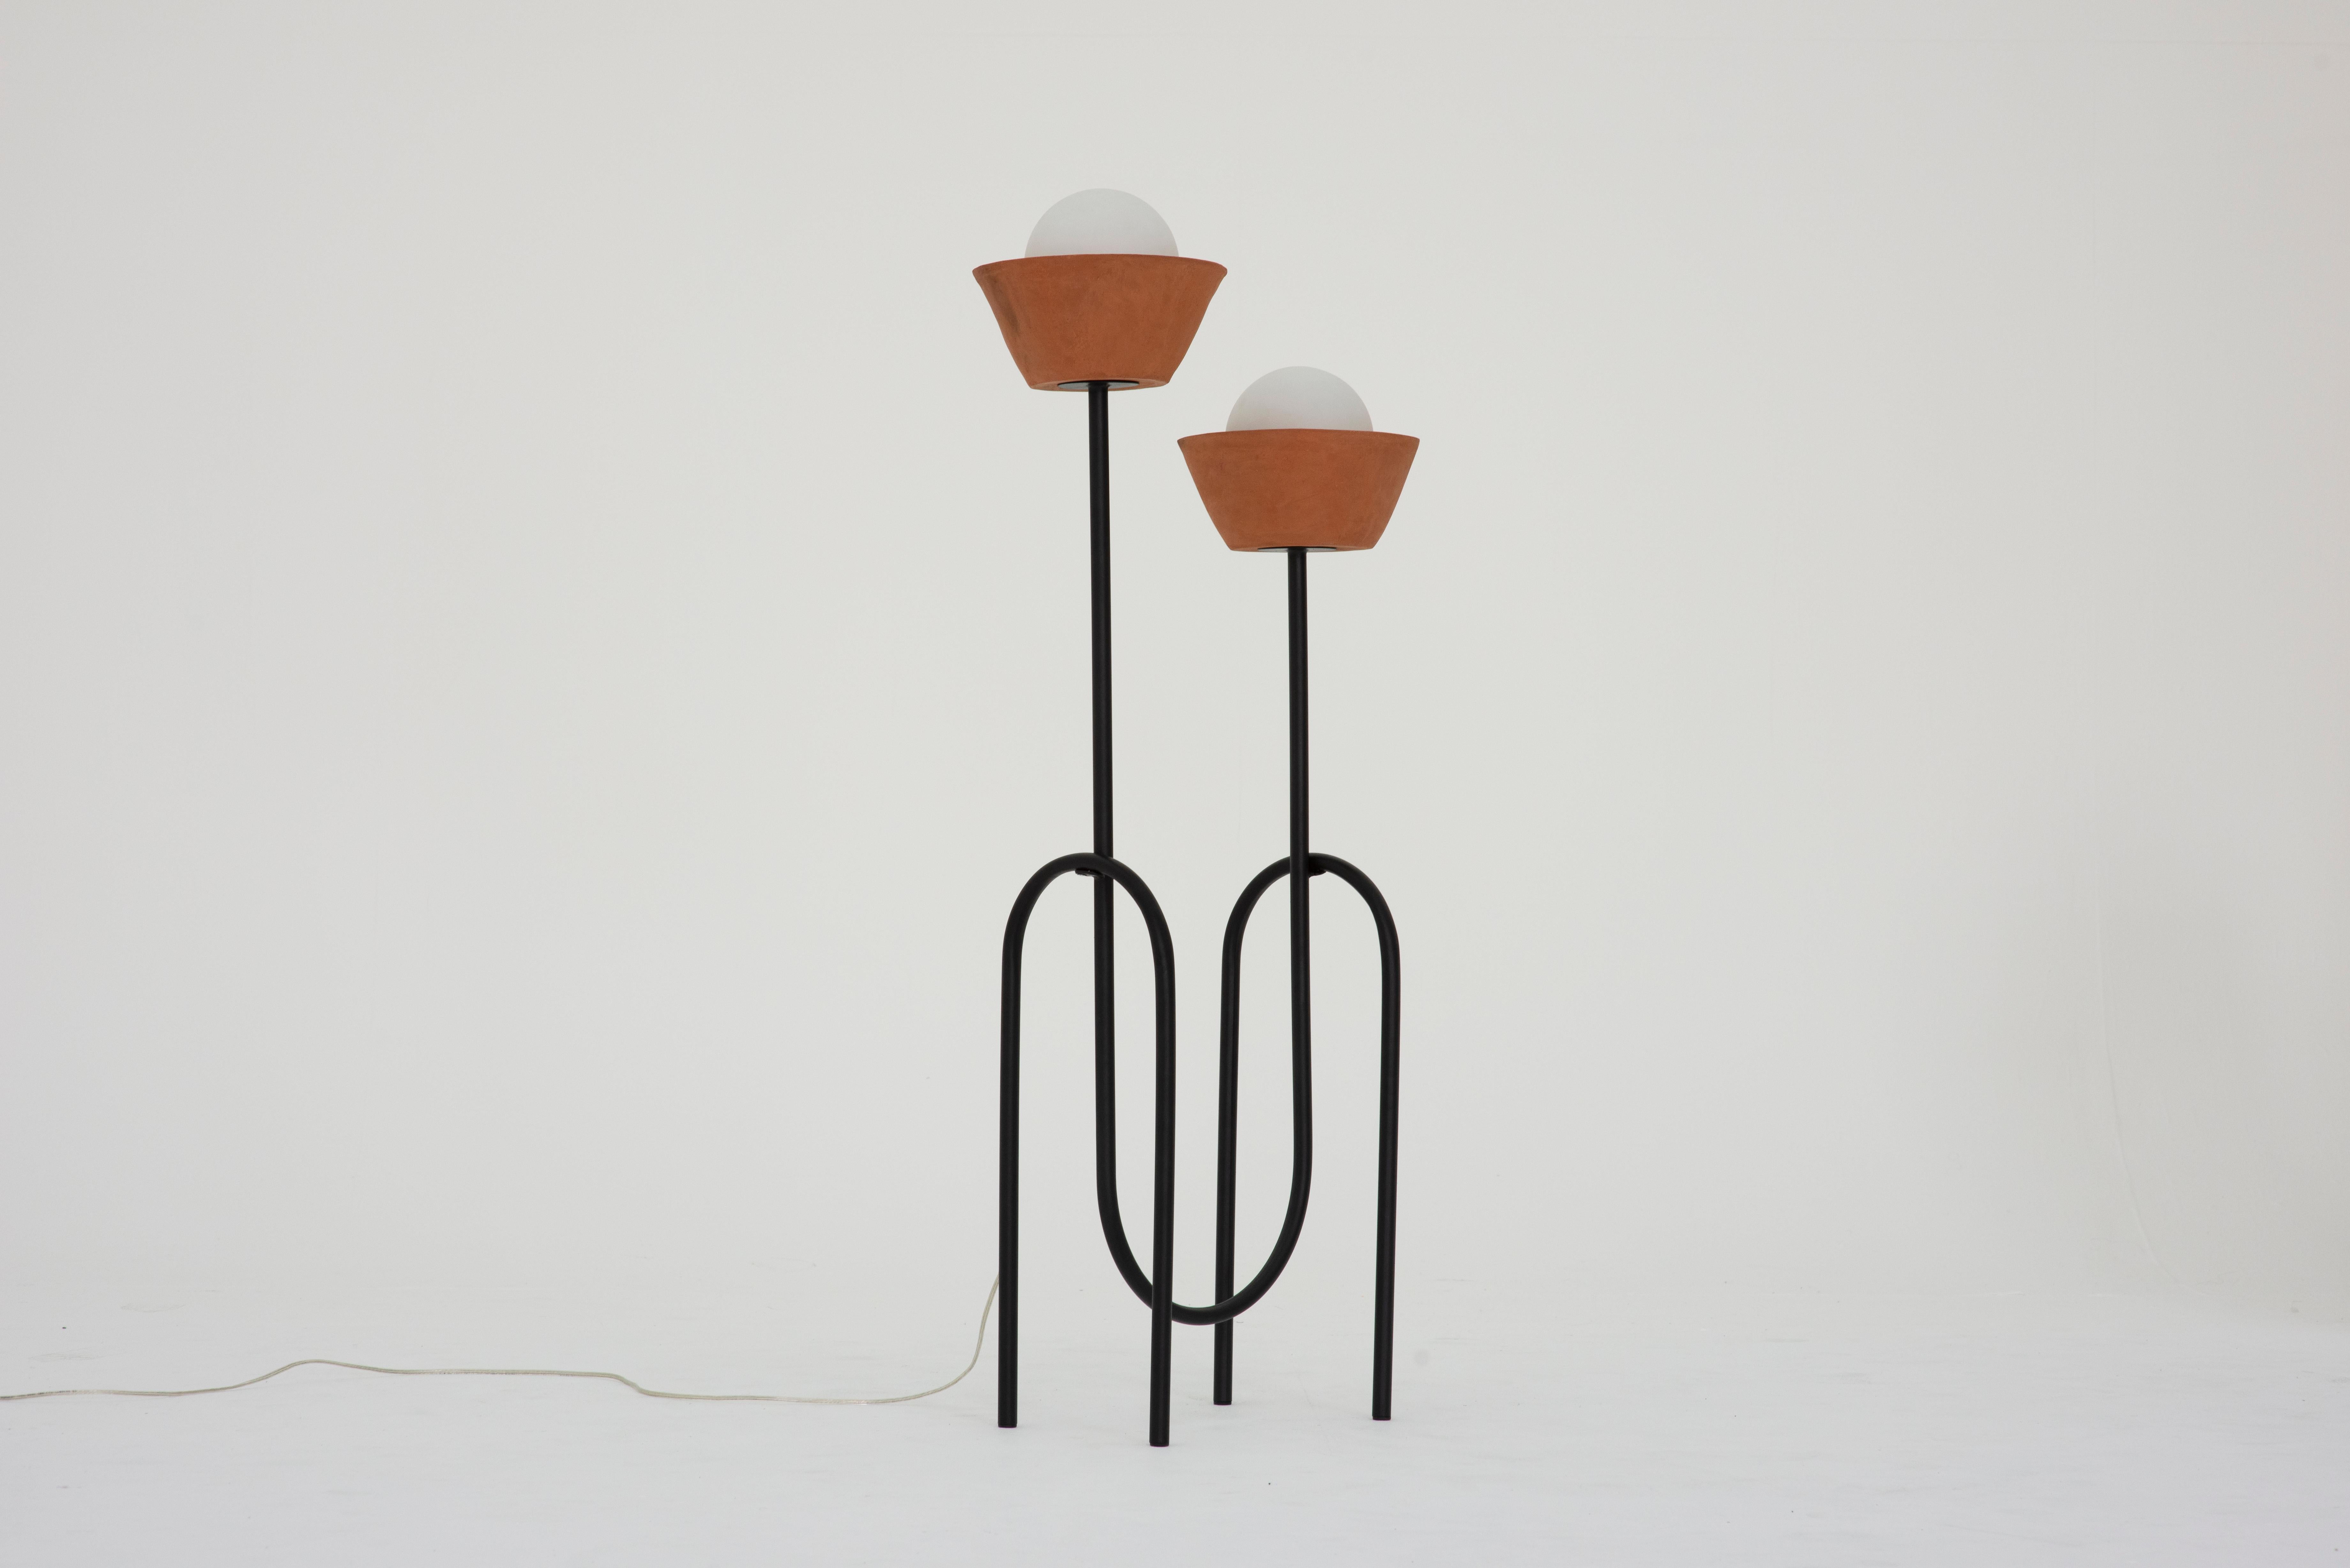 Constante Standing Lamp by Estudio Calido
Dimensions: D 25 x W 53 x H 122 cm.
Materials: Metal, Terracota Clay, Glass. 
Weight: 8.5 kg. 

In regards to our Production Process: since it is a handmade process, dimensions may vary. With the